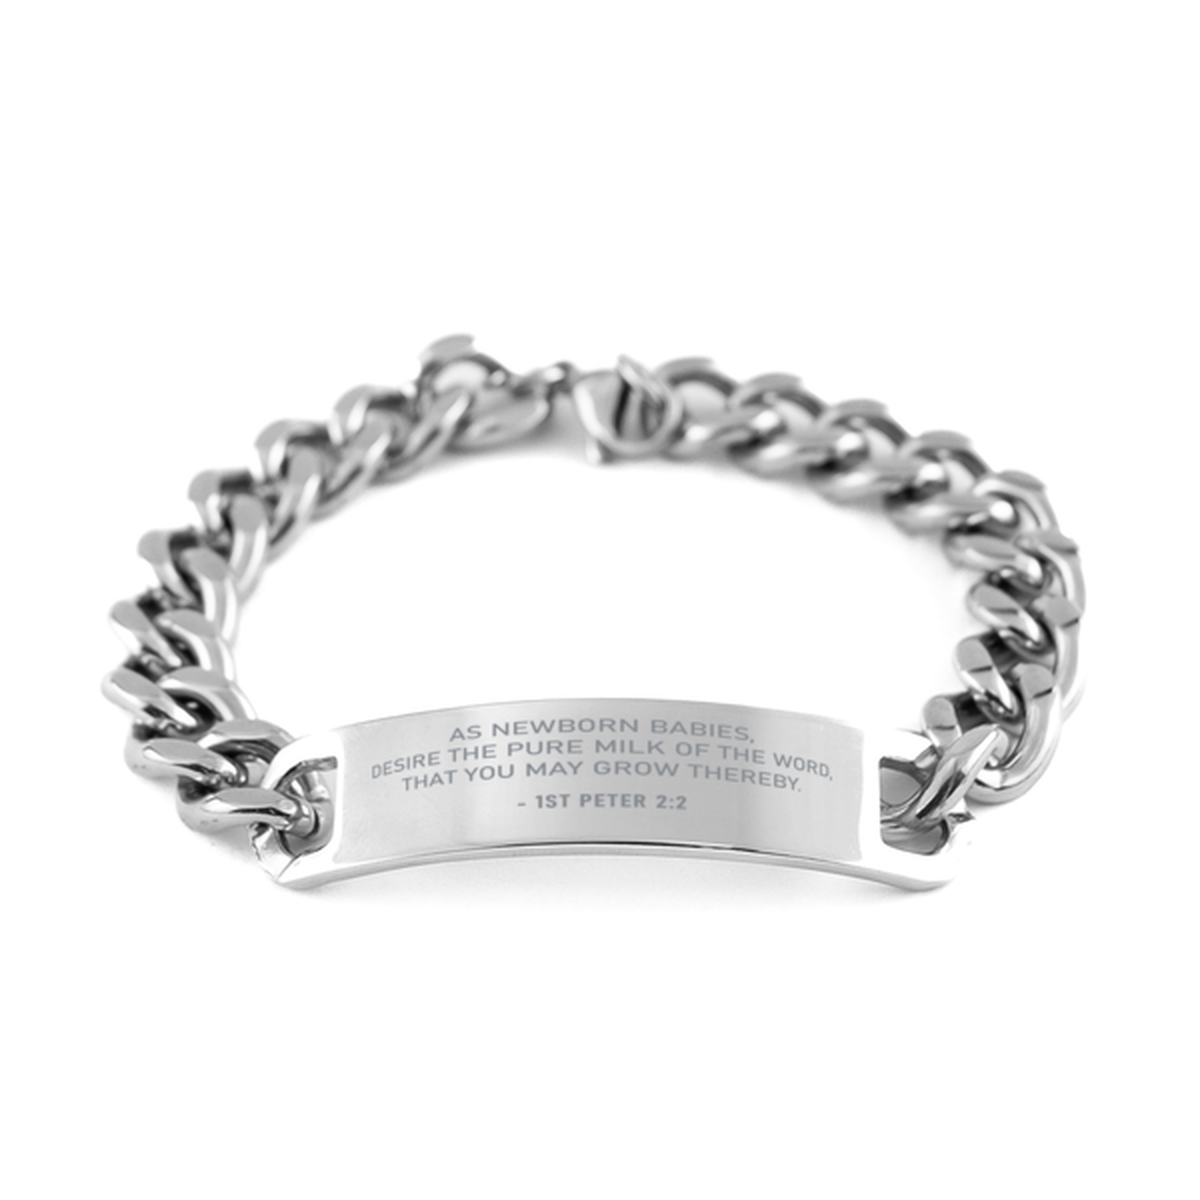 Bible Verse Chain Stainless Steel Bracelet, 1St Peter 2:2 As Newborn Babes, Desire The Pure Milk Of The, Inspirational Christian Gifts For Men Women